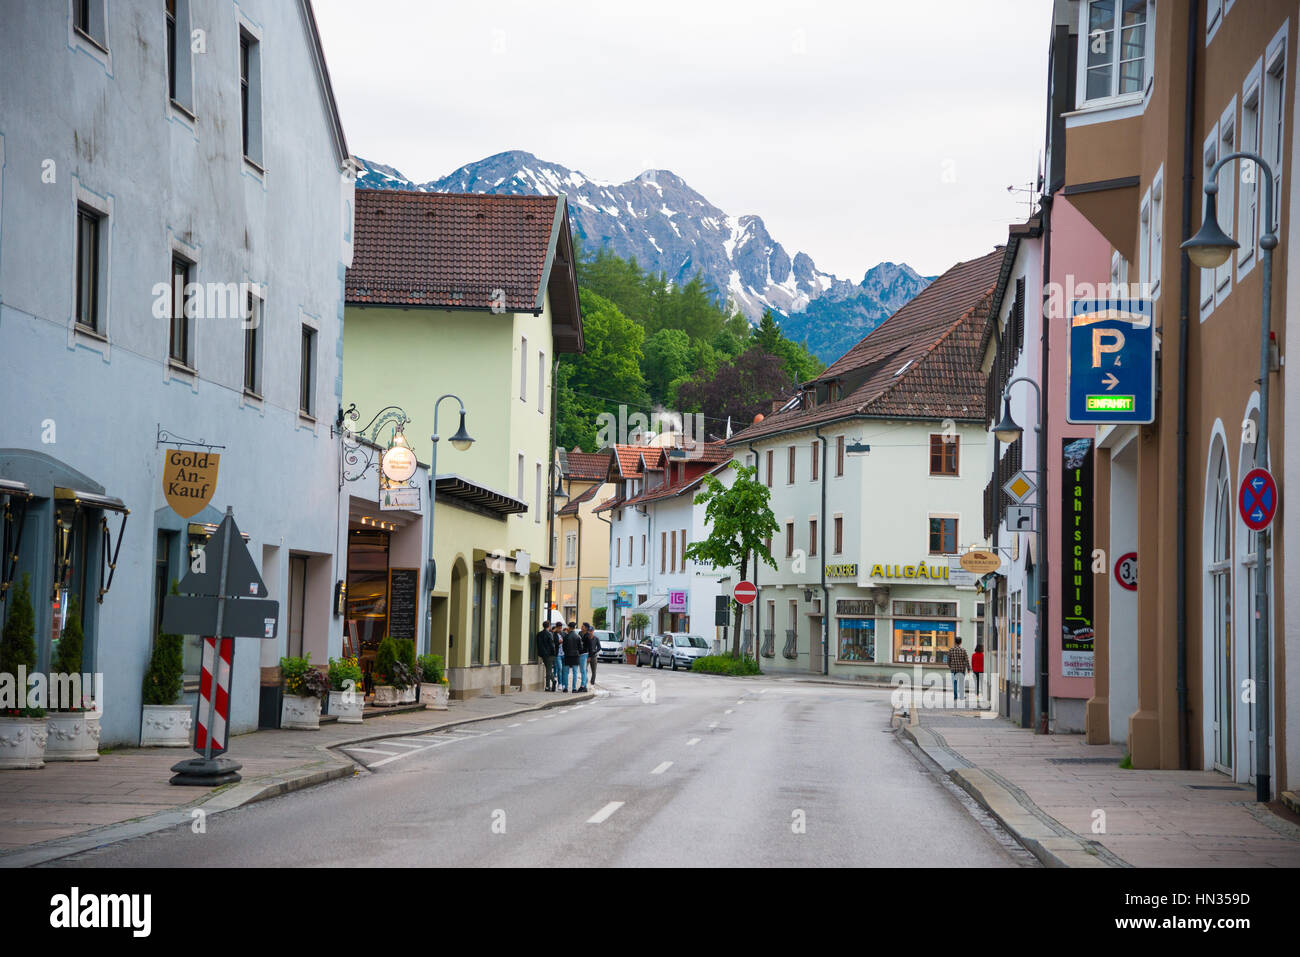 Fussen, Germany - June 4, 2016: View of beautiful historical street in Fussen with typical bavarian architecture buildings. Stock Photo